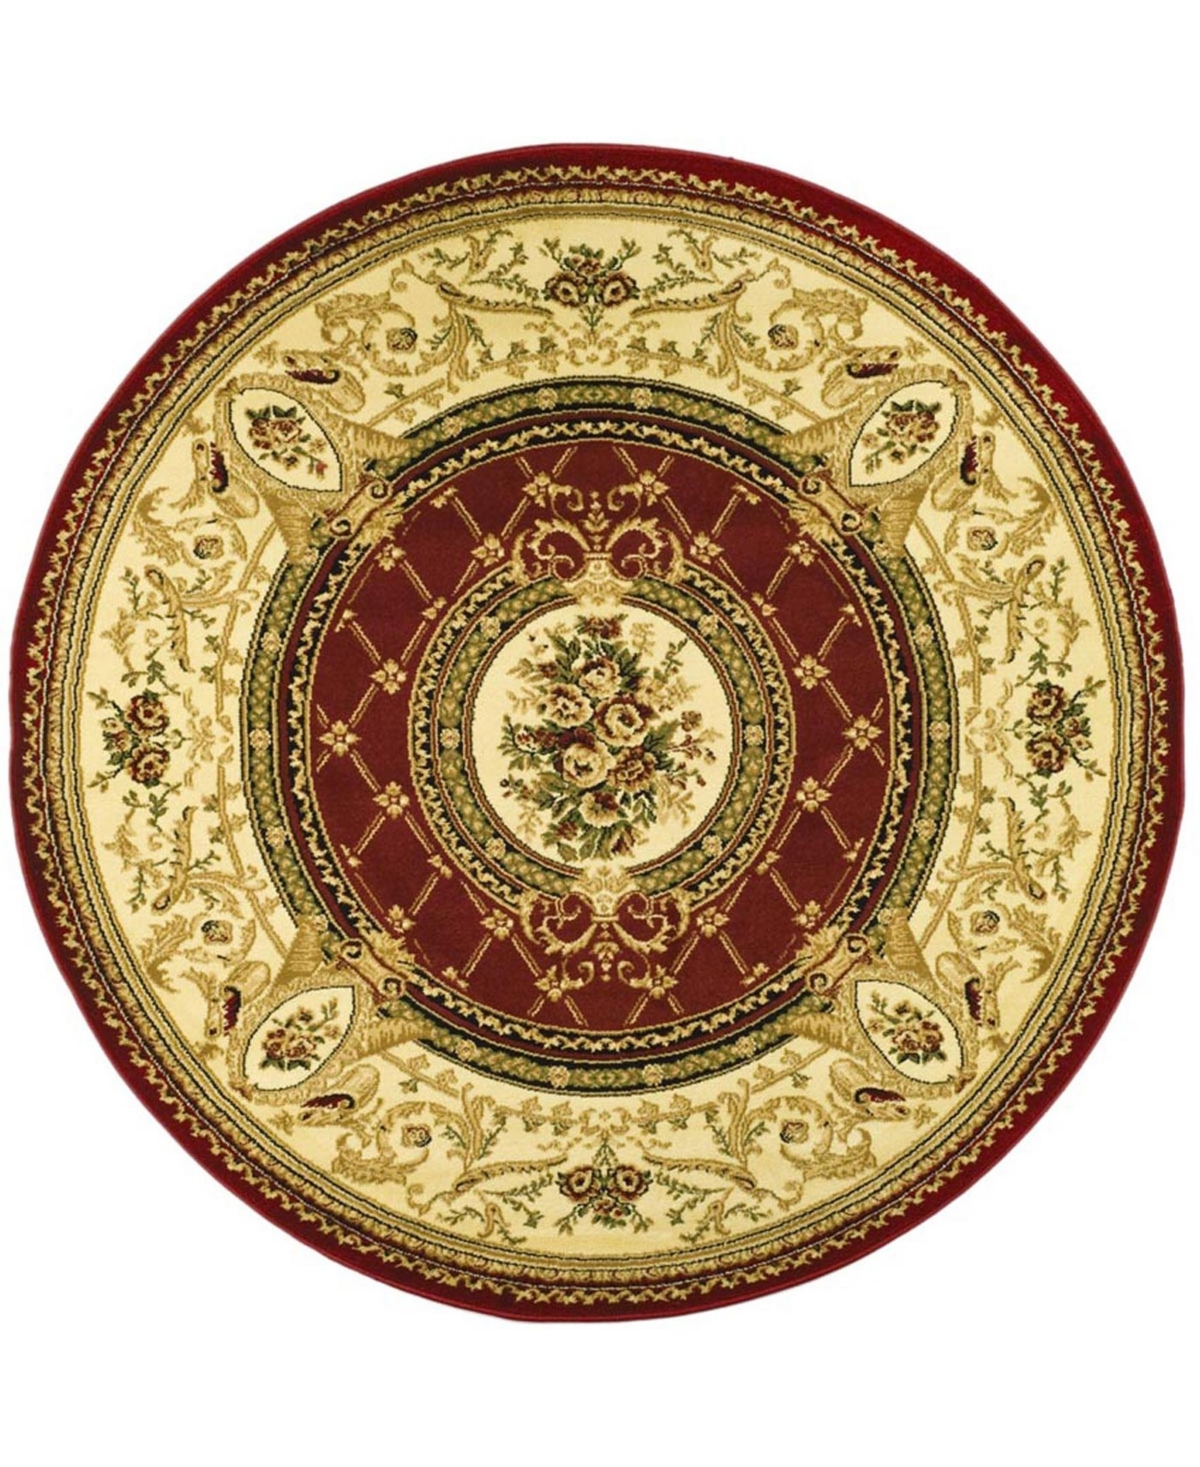 Safavieh Lyndhurst Red and Ivory 8' x 8' Round Area Rug - Red Group